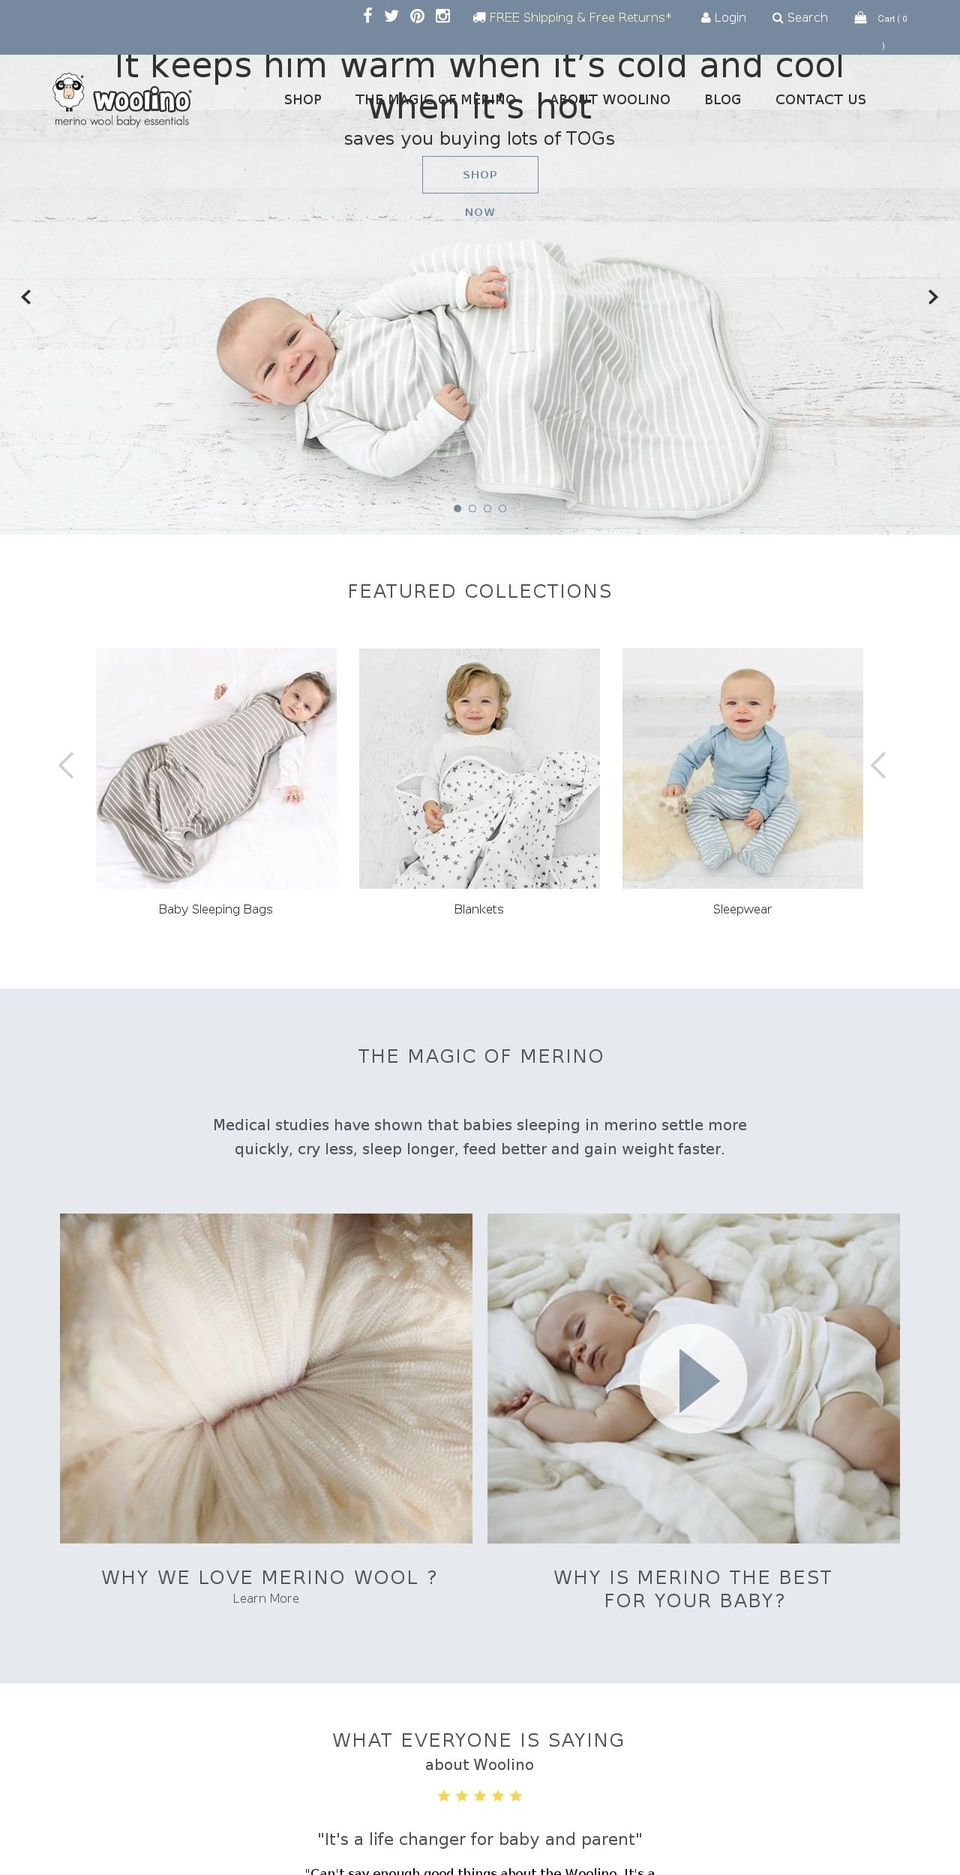 Motion Shopify theme site example woolino.com